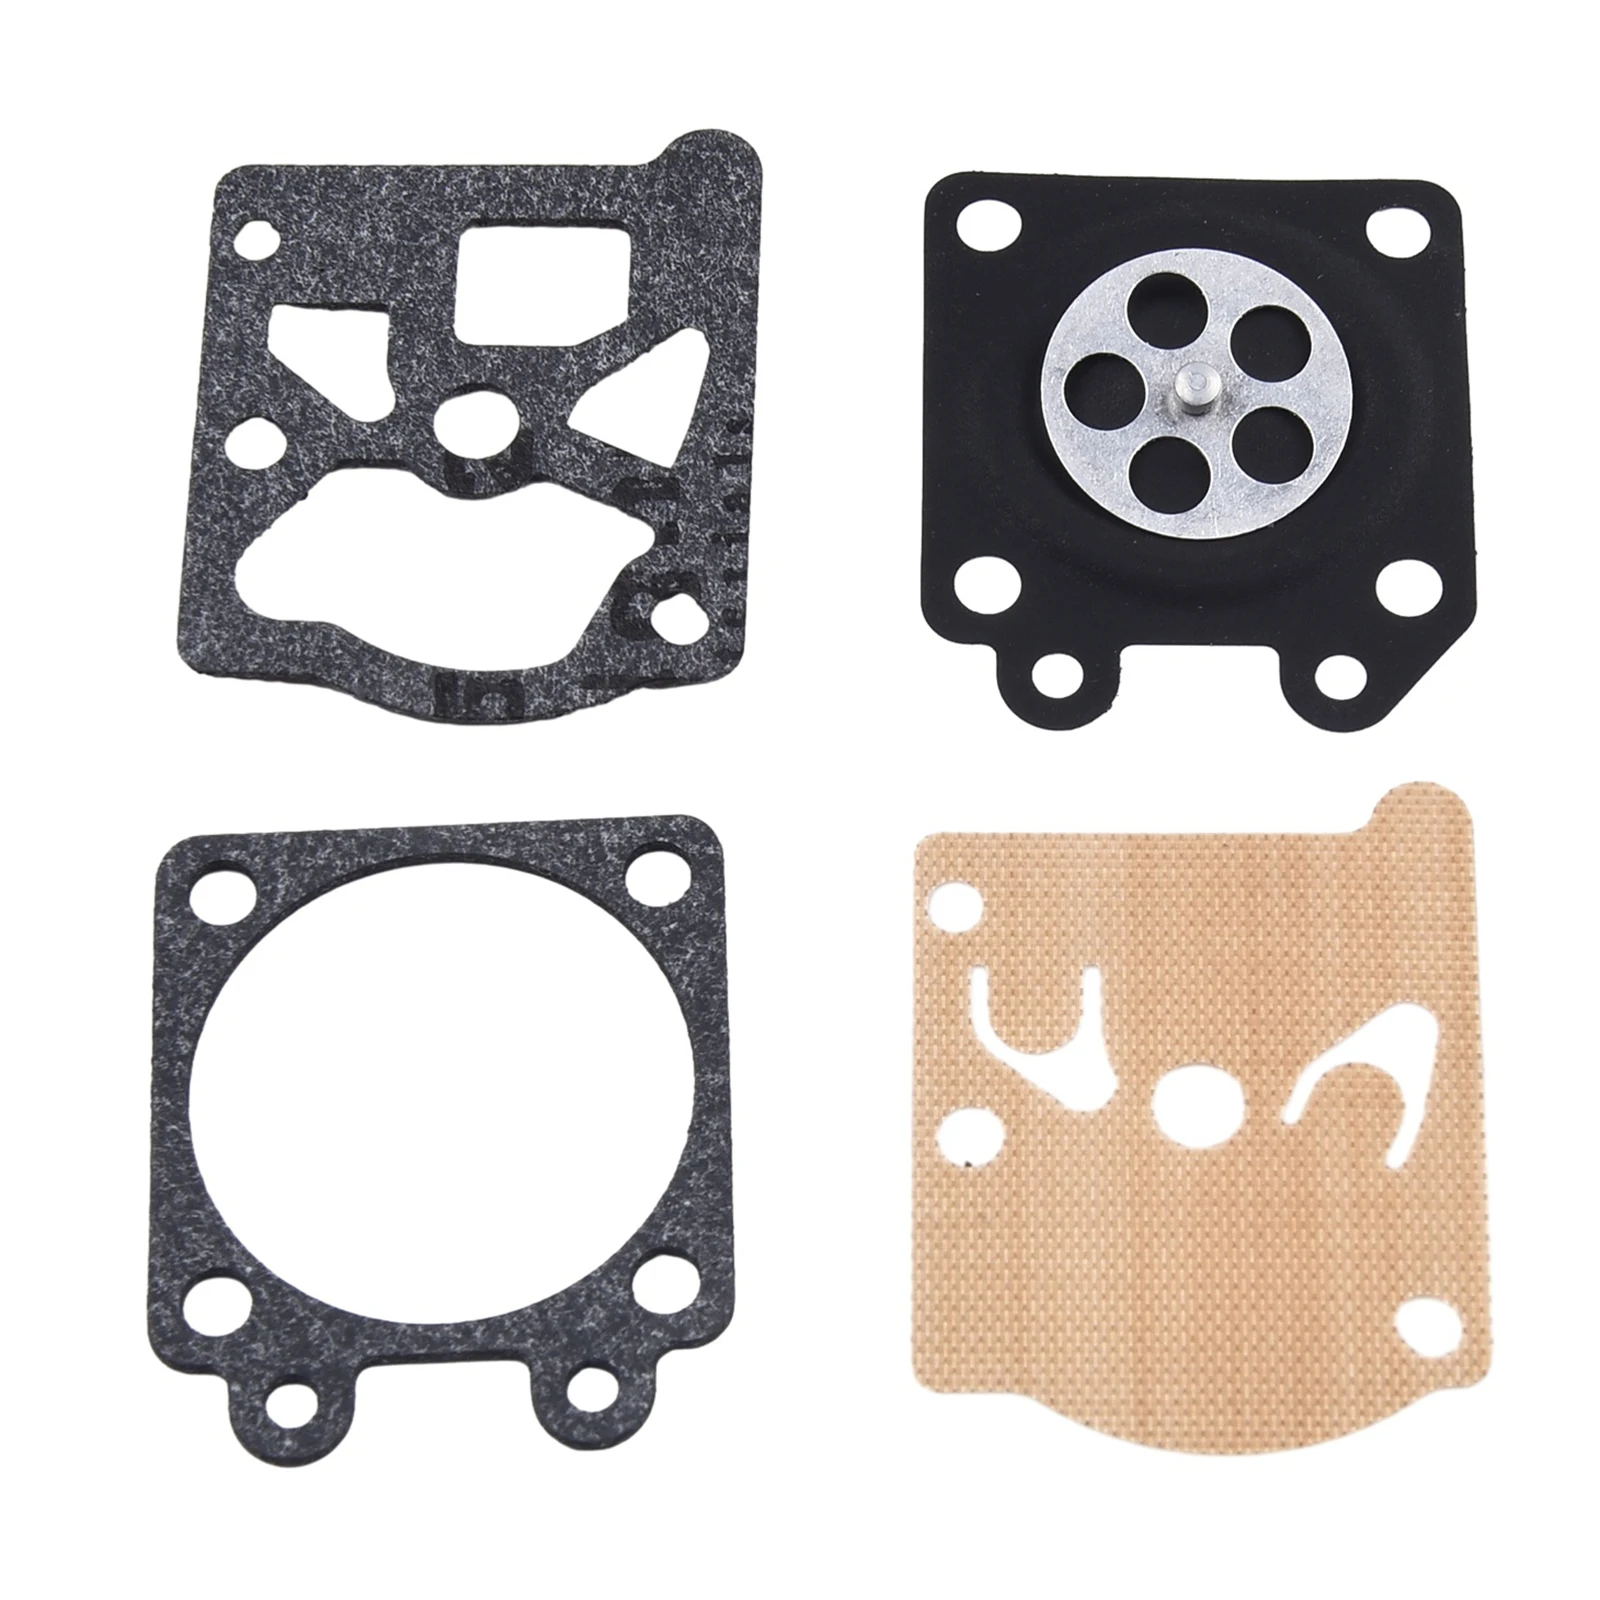 Brand New Diaphragm Accessories 1 Set 3800 5200 4500 5800 45CC 5200 58CC Carburetor Chain Saw Series Replacement 18 guide bar chain 0 325 058 guage 72dl for 62cc 58cc 52cc chainsaw for chinese chainsaw 4500 5200 5800 tarus timbertech